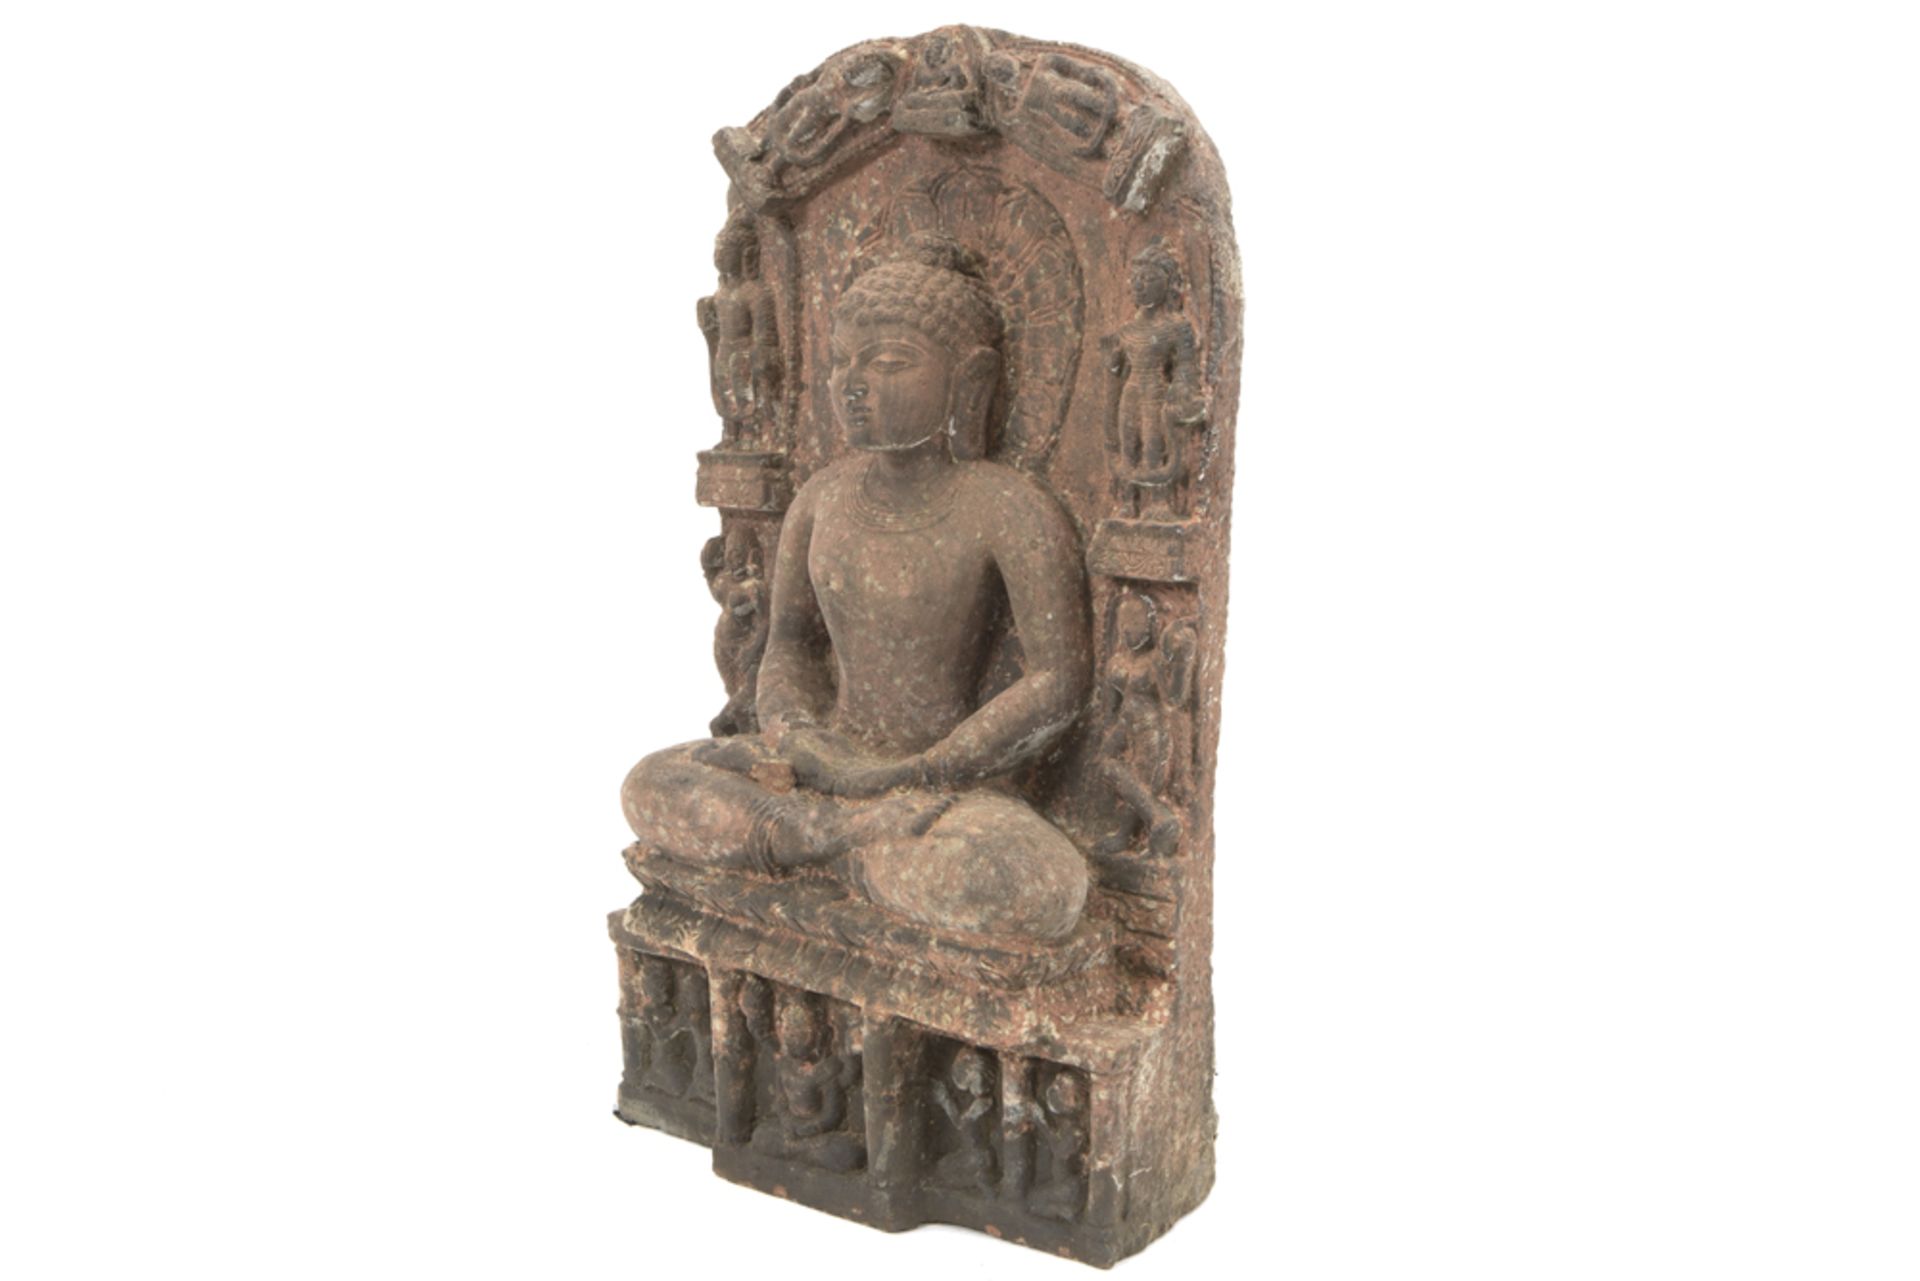 11th/12th Cent. Indian Gujarat sculpture in red sandstone representing "Buddha Sakyamuni" (in - Image 3 of 4